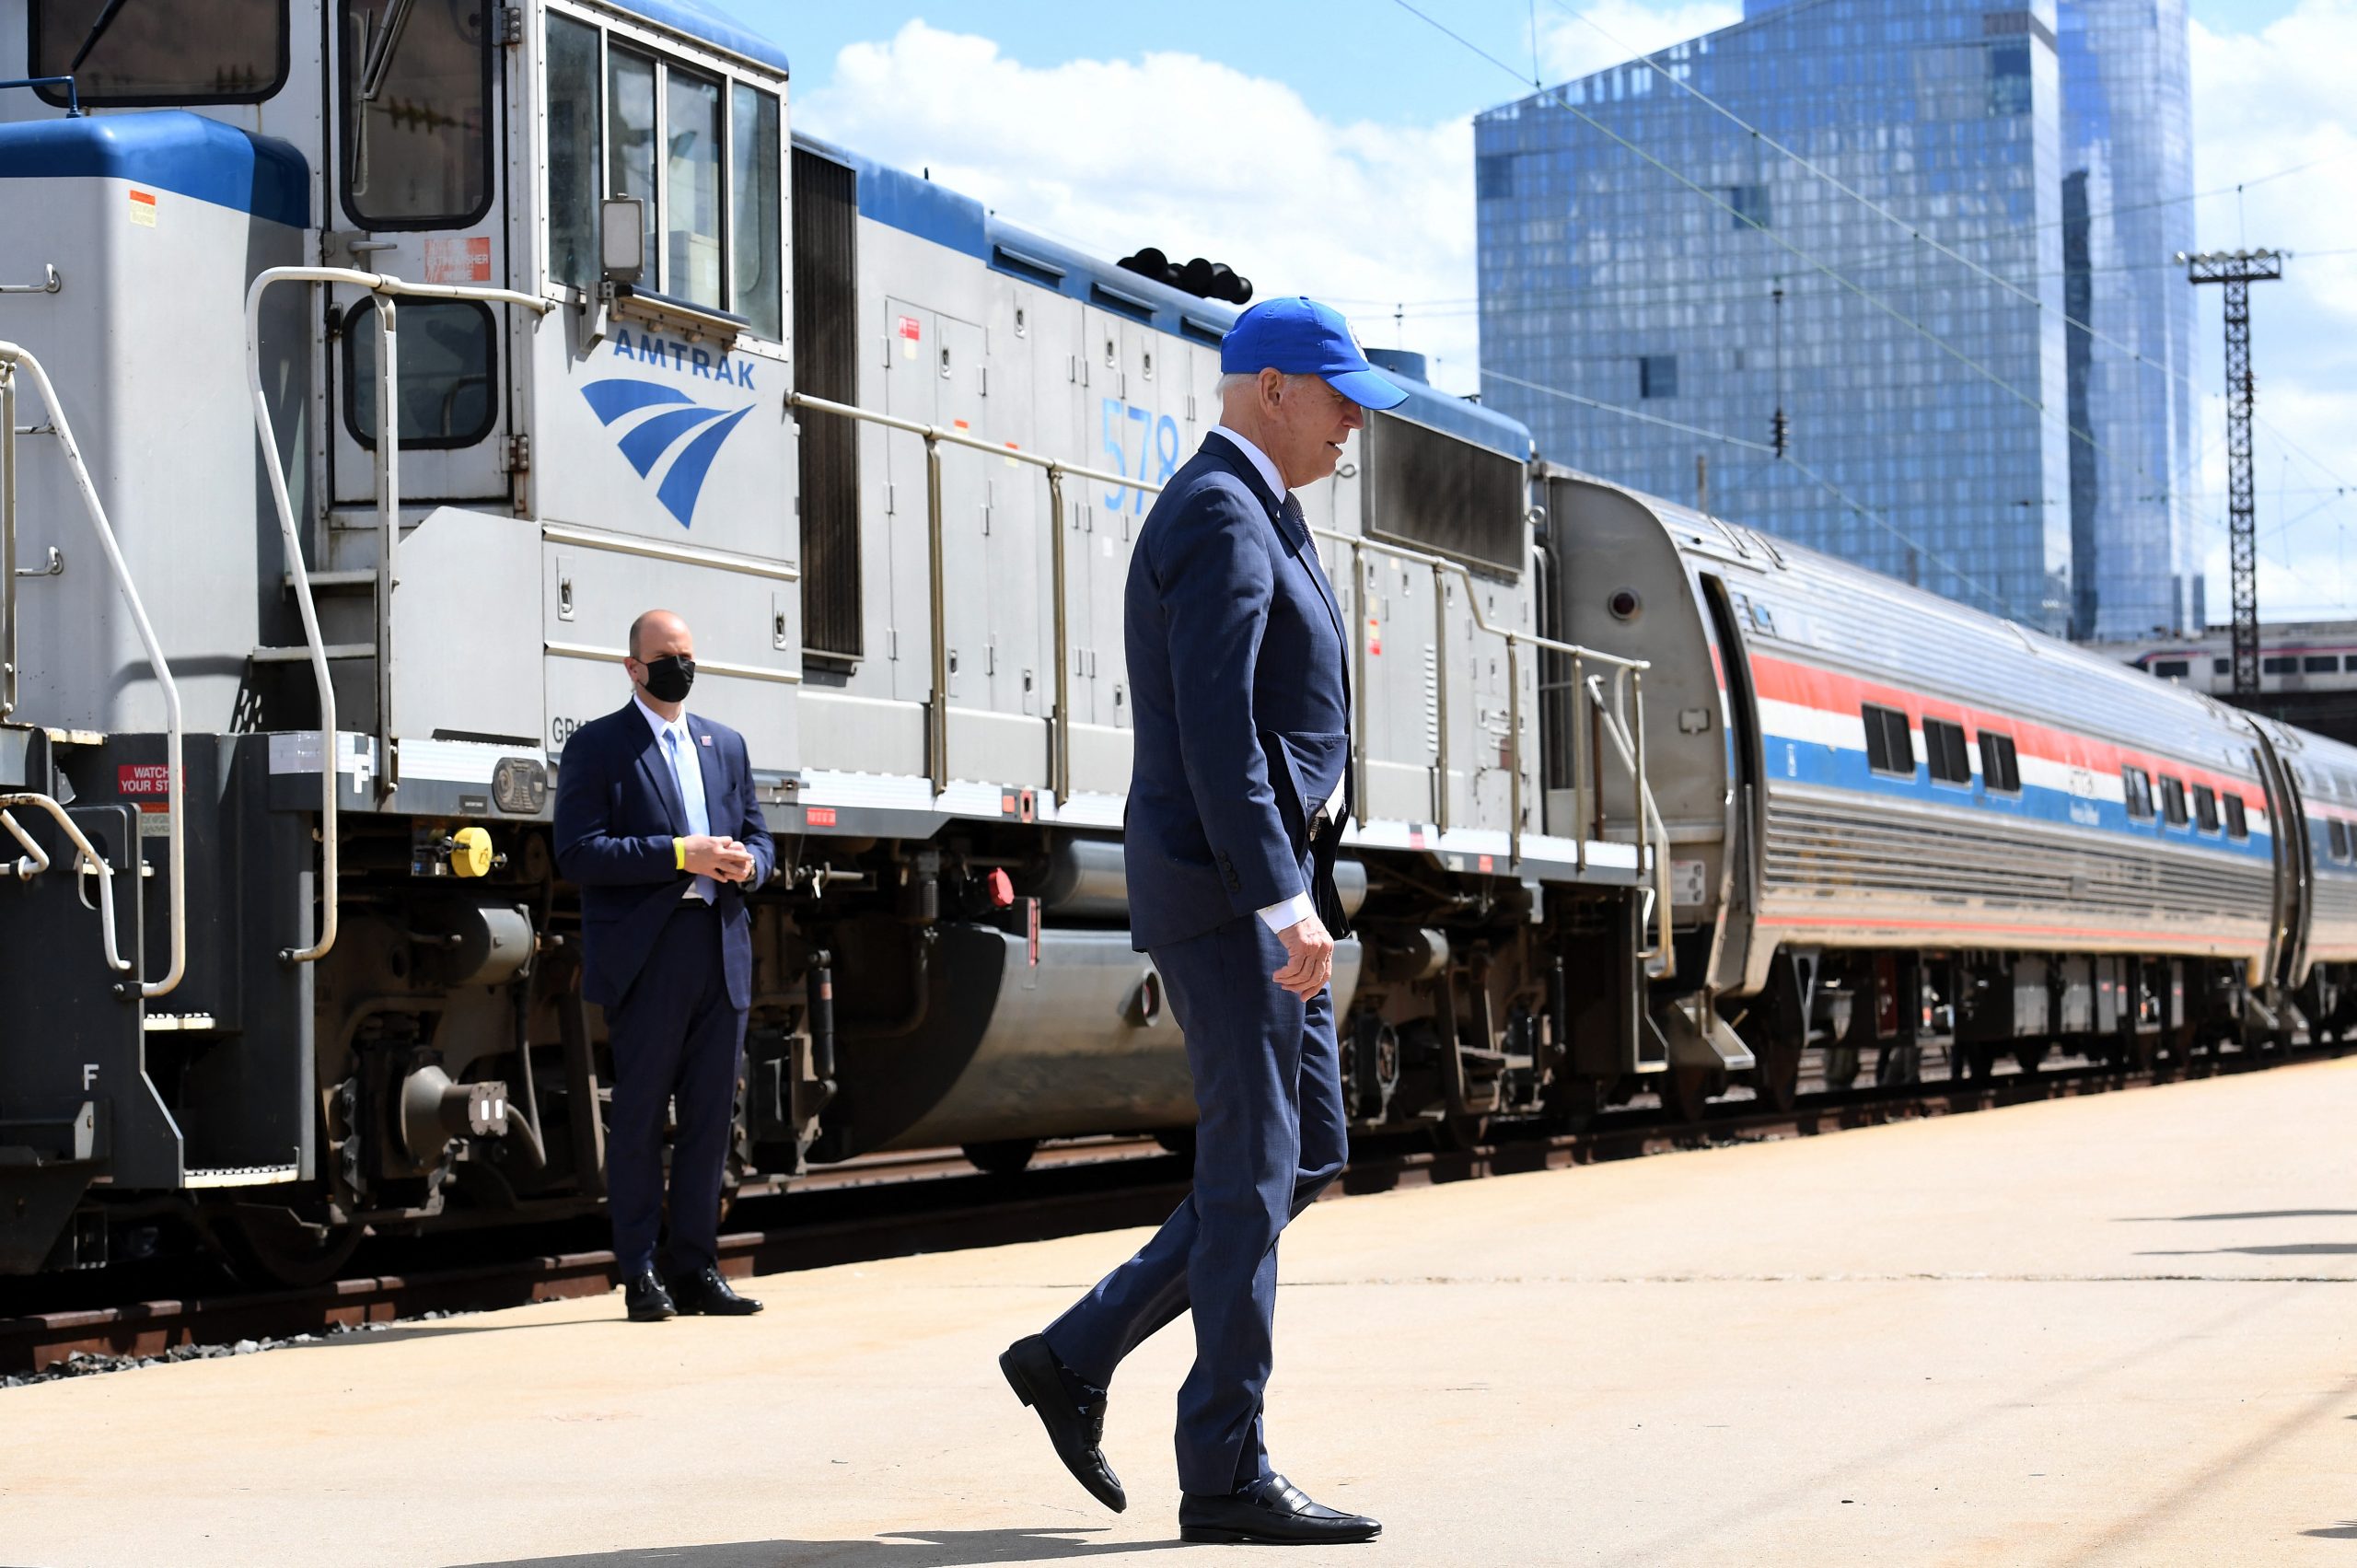 The United States plans to invest $ 66 billion in railways